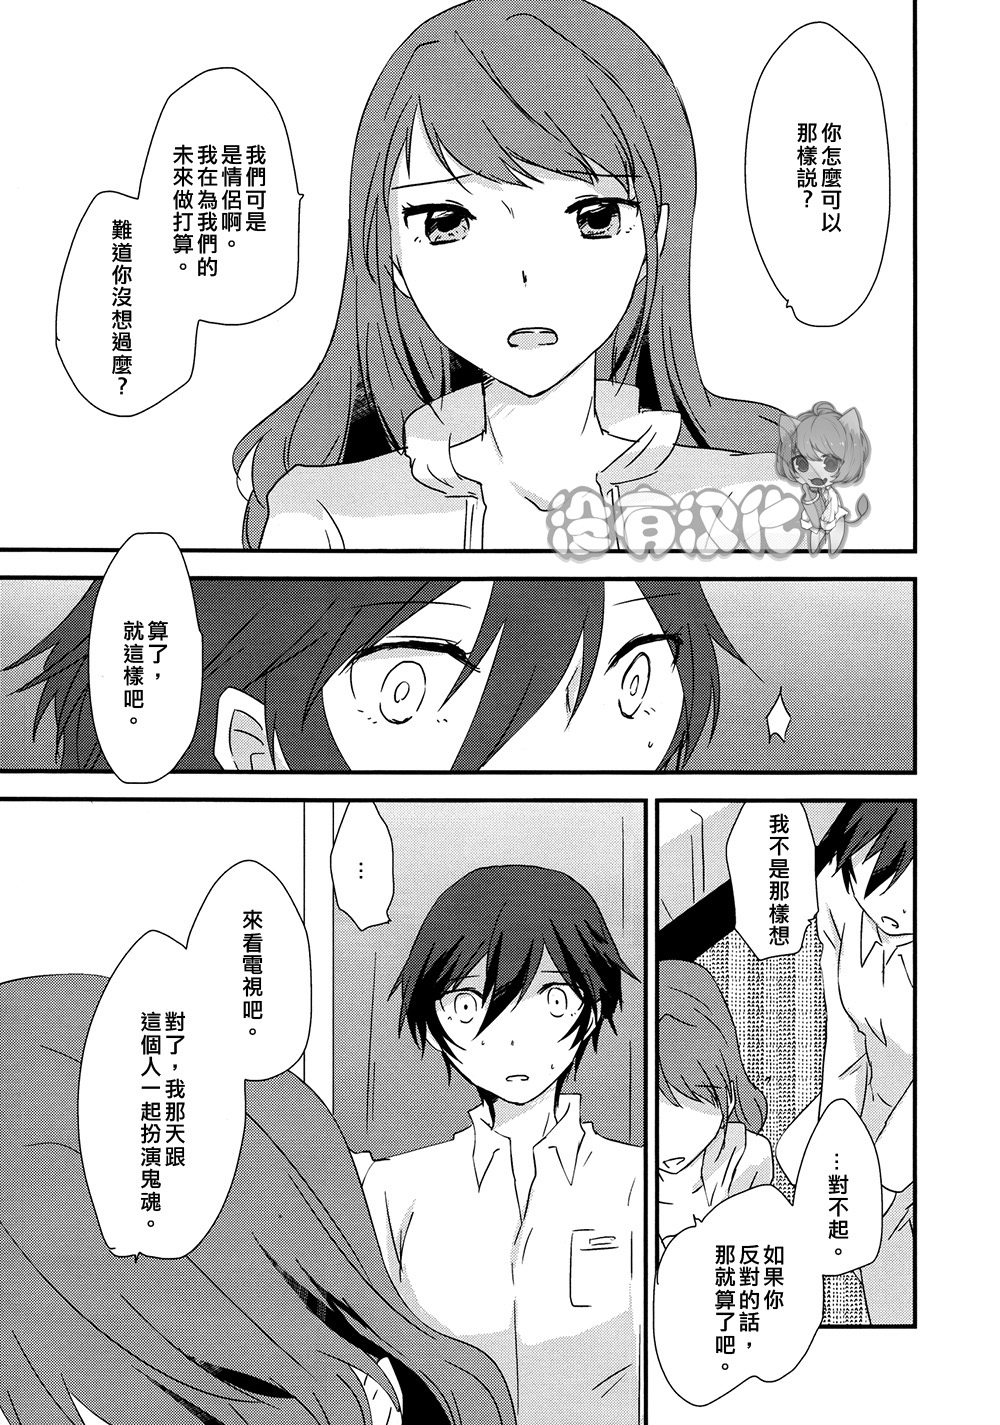 (C88) [MEGANE81 (Shinocco)] Eighteen Emotion (Persona 4) [Chinese] [沒有漢化] page 9 full